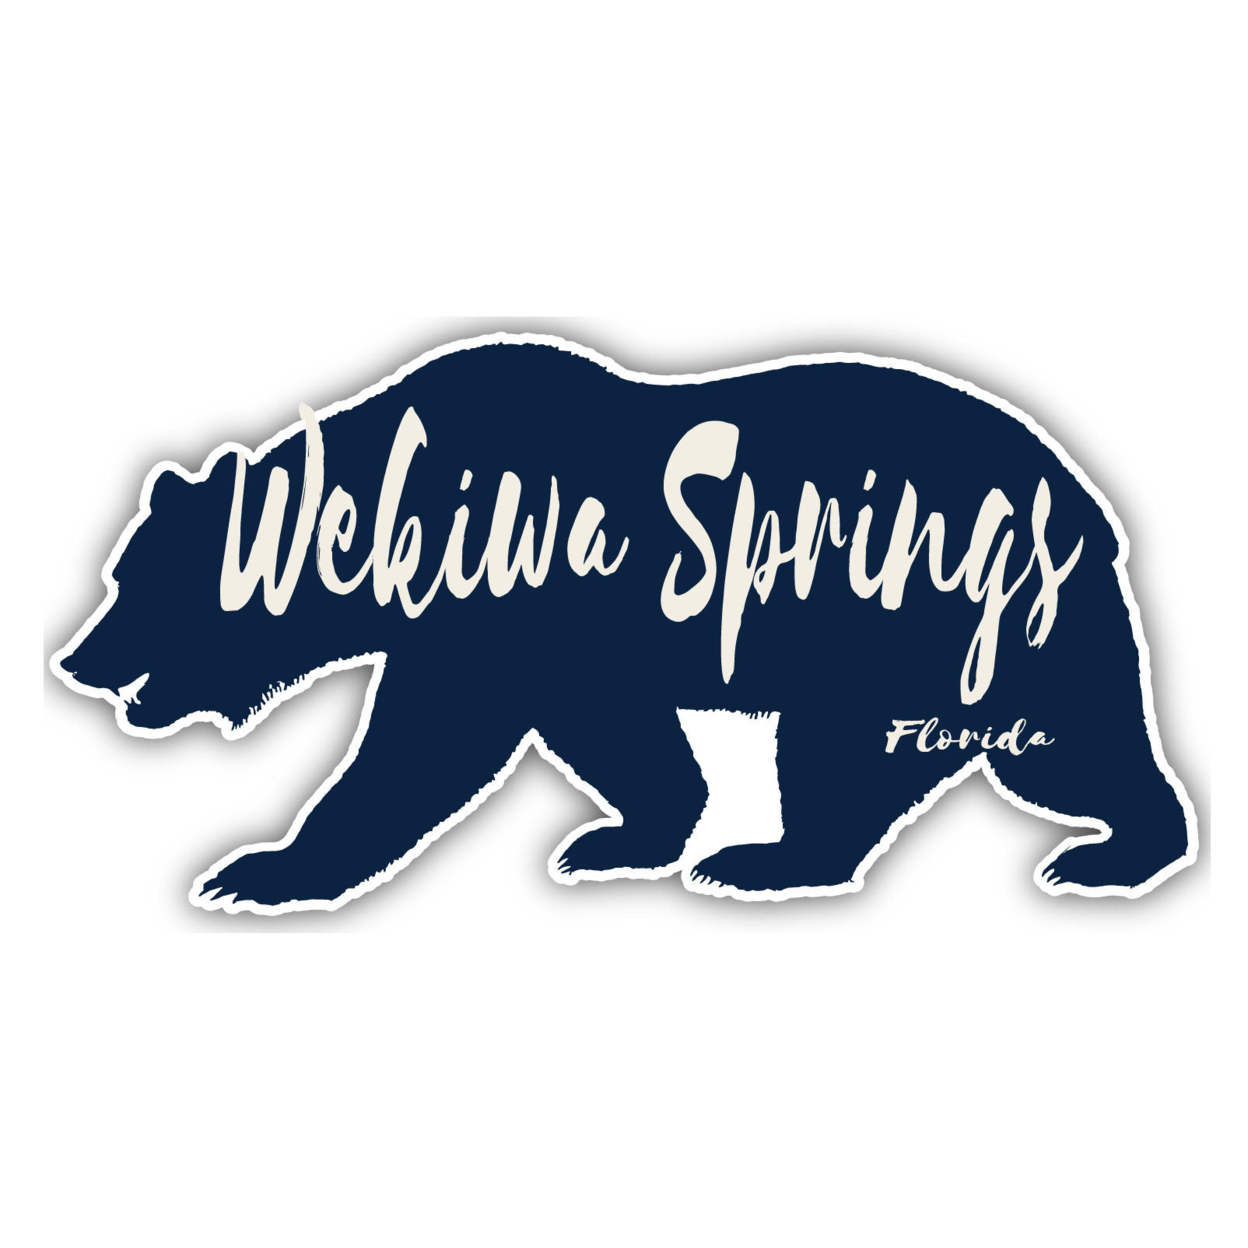 Wekiwa Springs Florida Souvenir Decorative Stickers (Choose Theme And Size) - Single Unit, 2-Inch, Great Outdoors